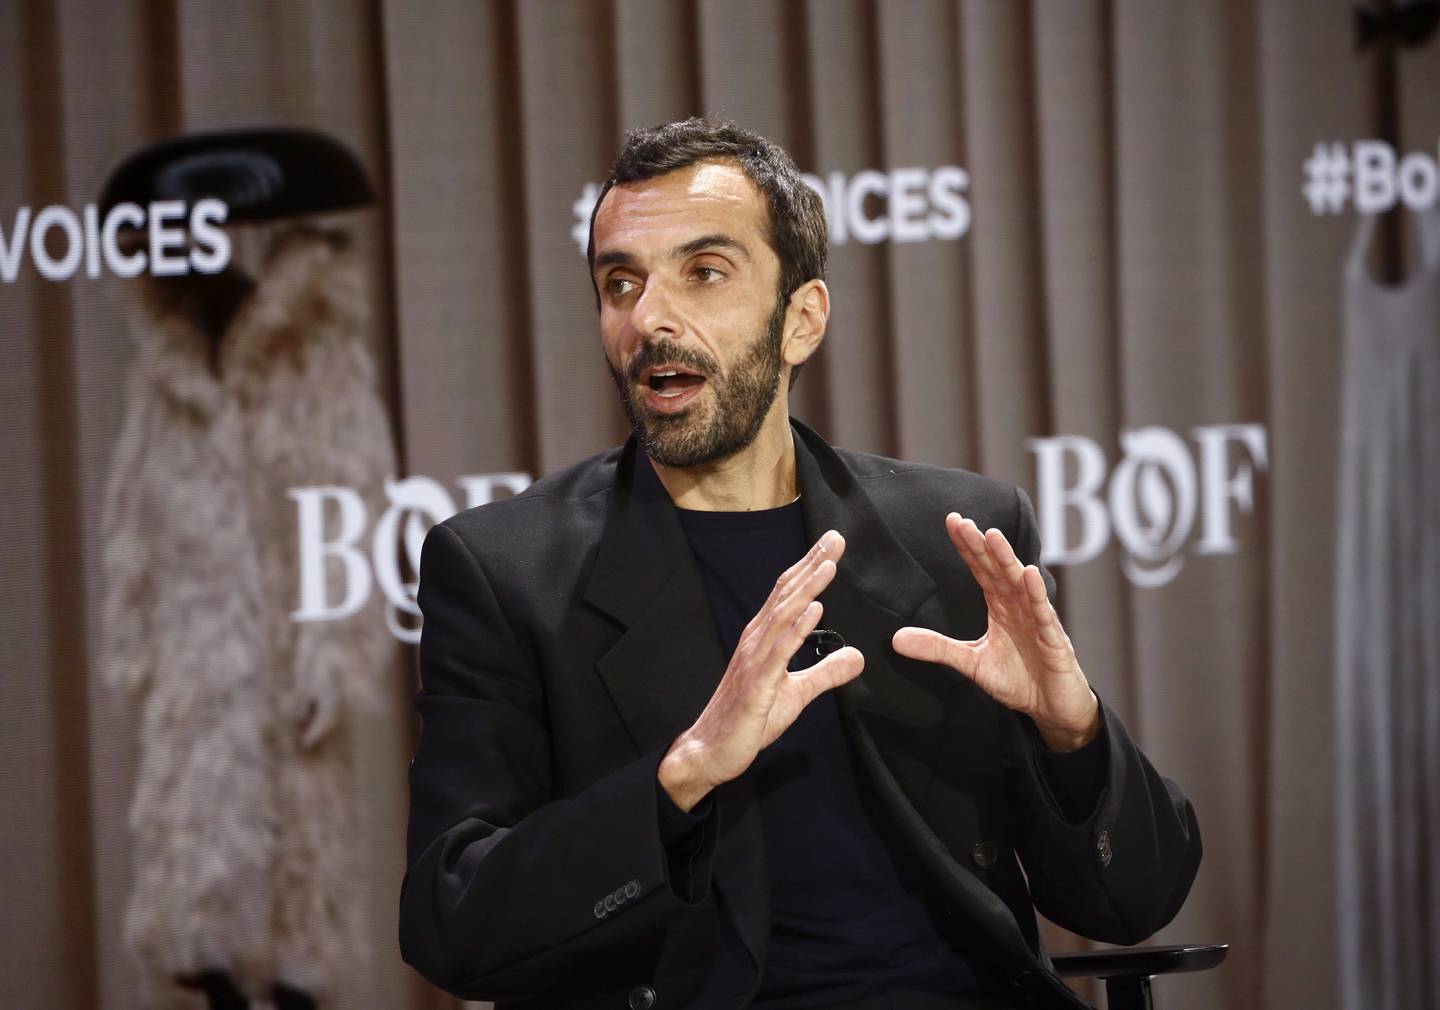 Balenciaga is launching a metaverse business unit, revealed chief executive Cédric Charbit at BoF’s annual VOICES gathering.